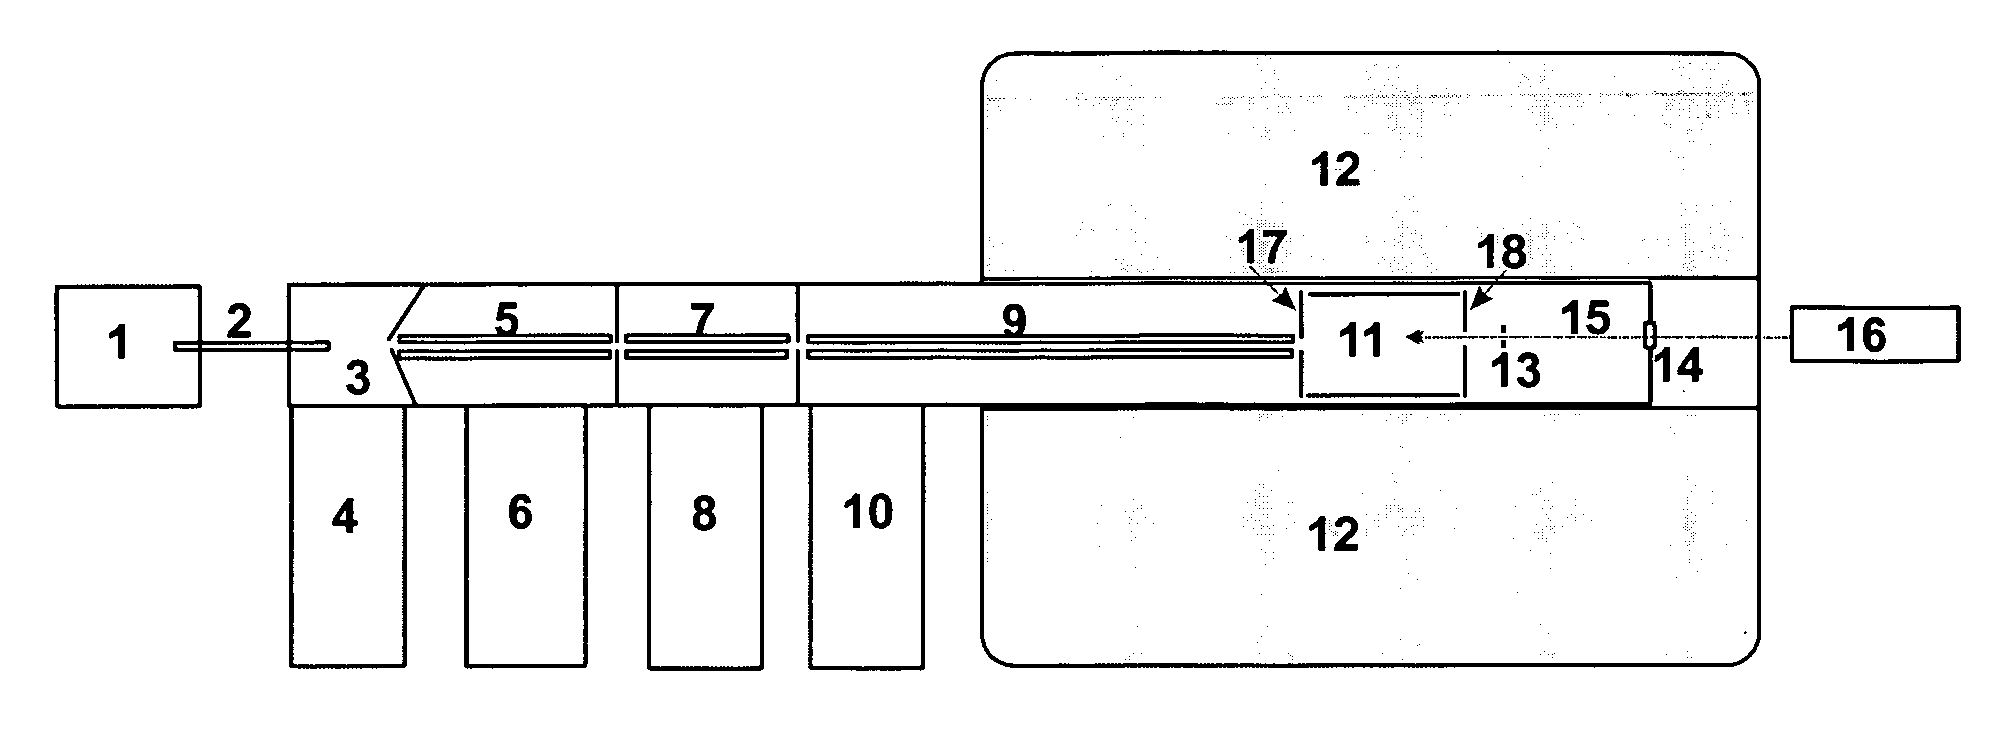 Measuring methods for ion cyclotron resonance mass spectrometers